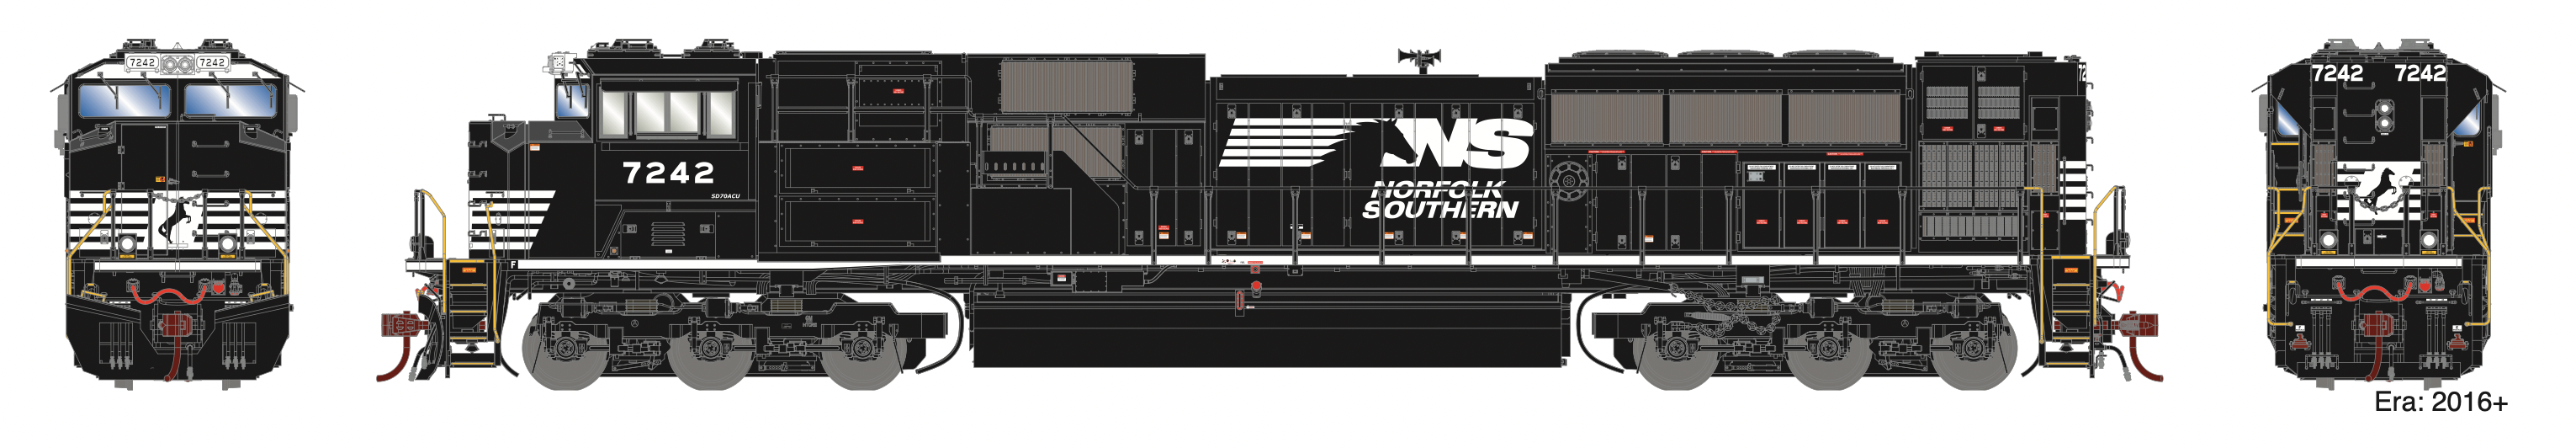 Athearn Genesis G75860 HO Scale SD70ACu Norfolk Southern NS 7281 DCC Sound